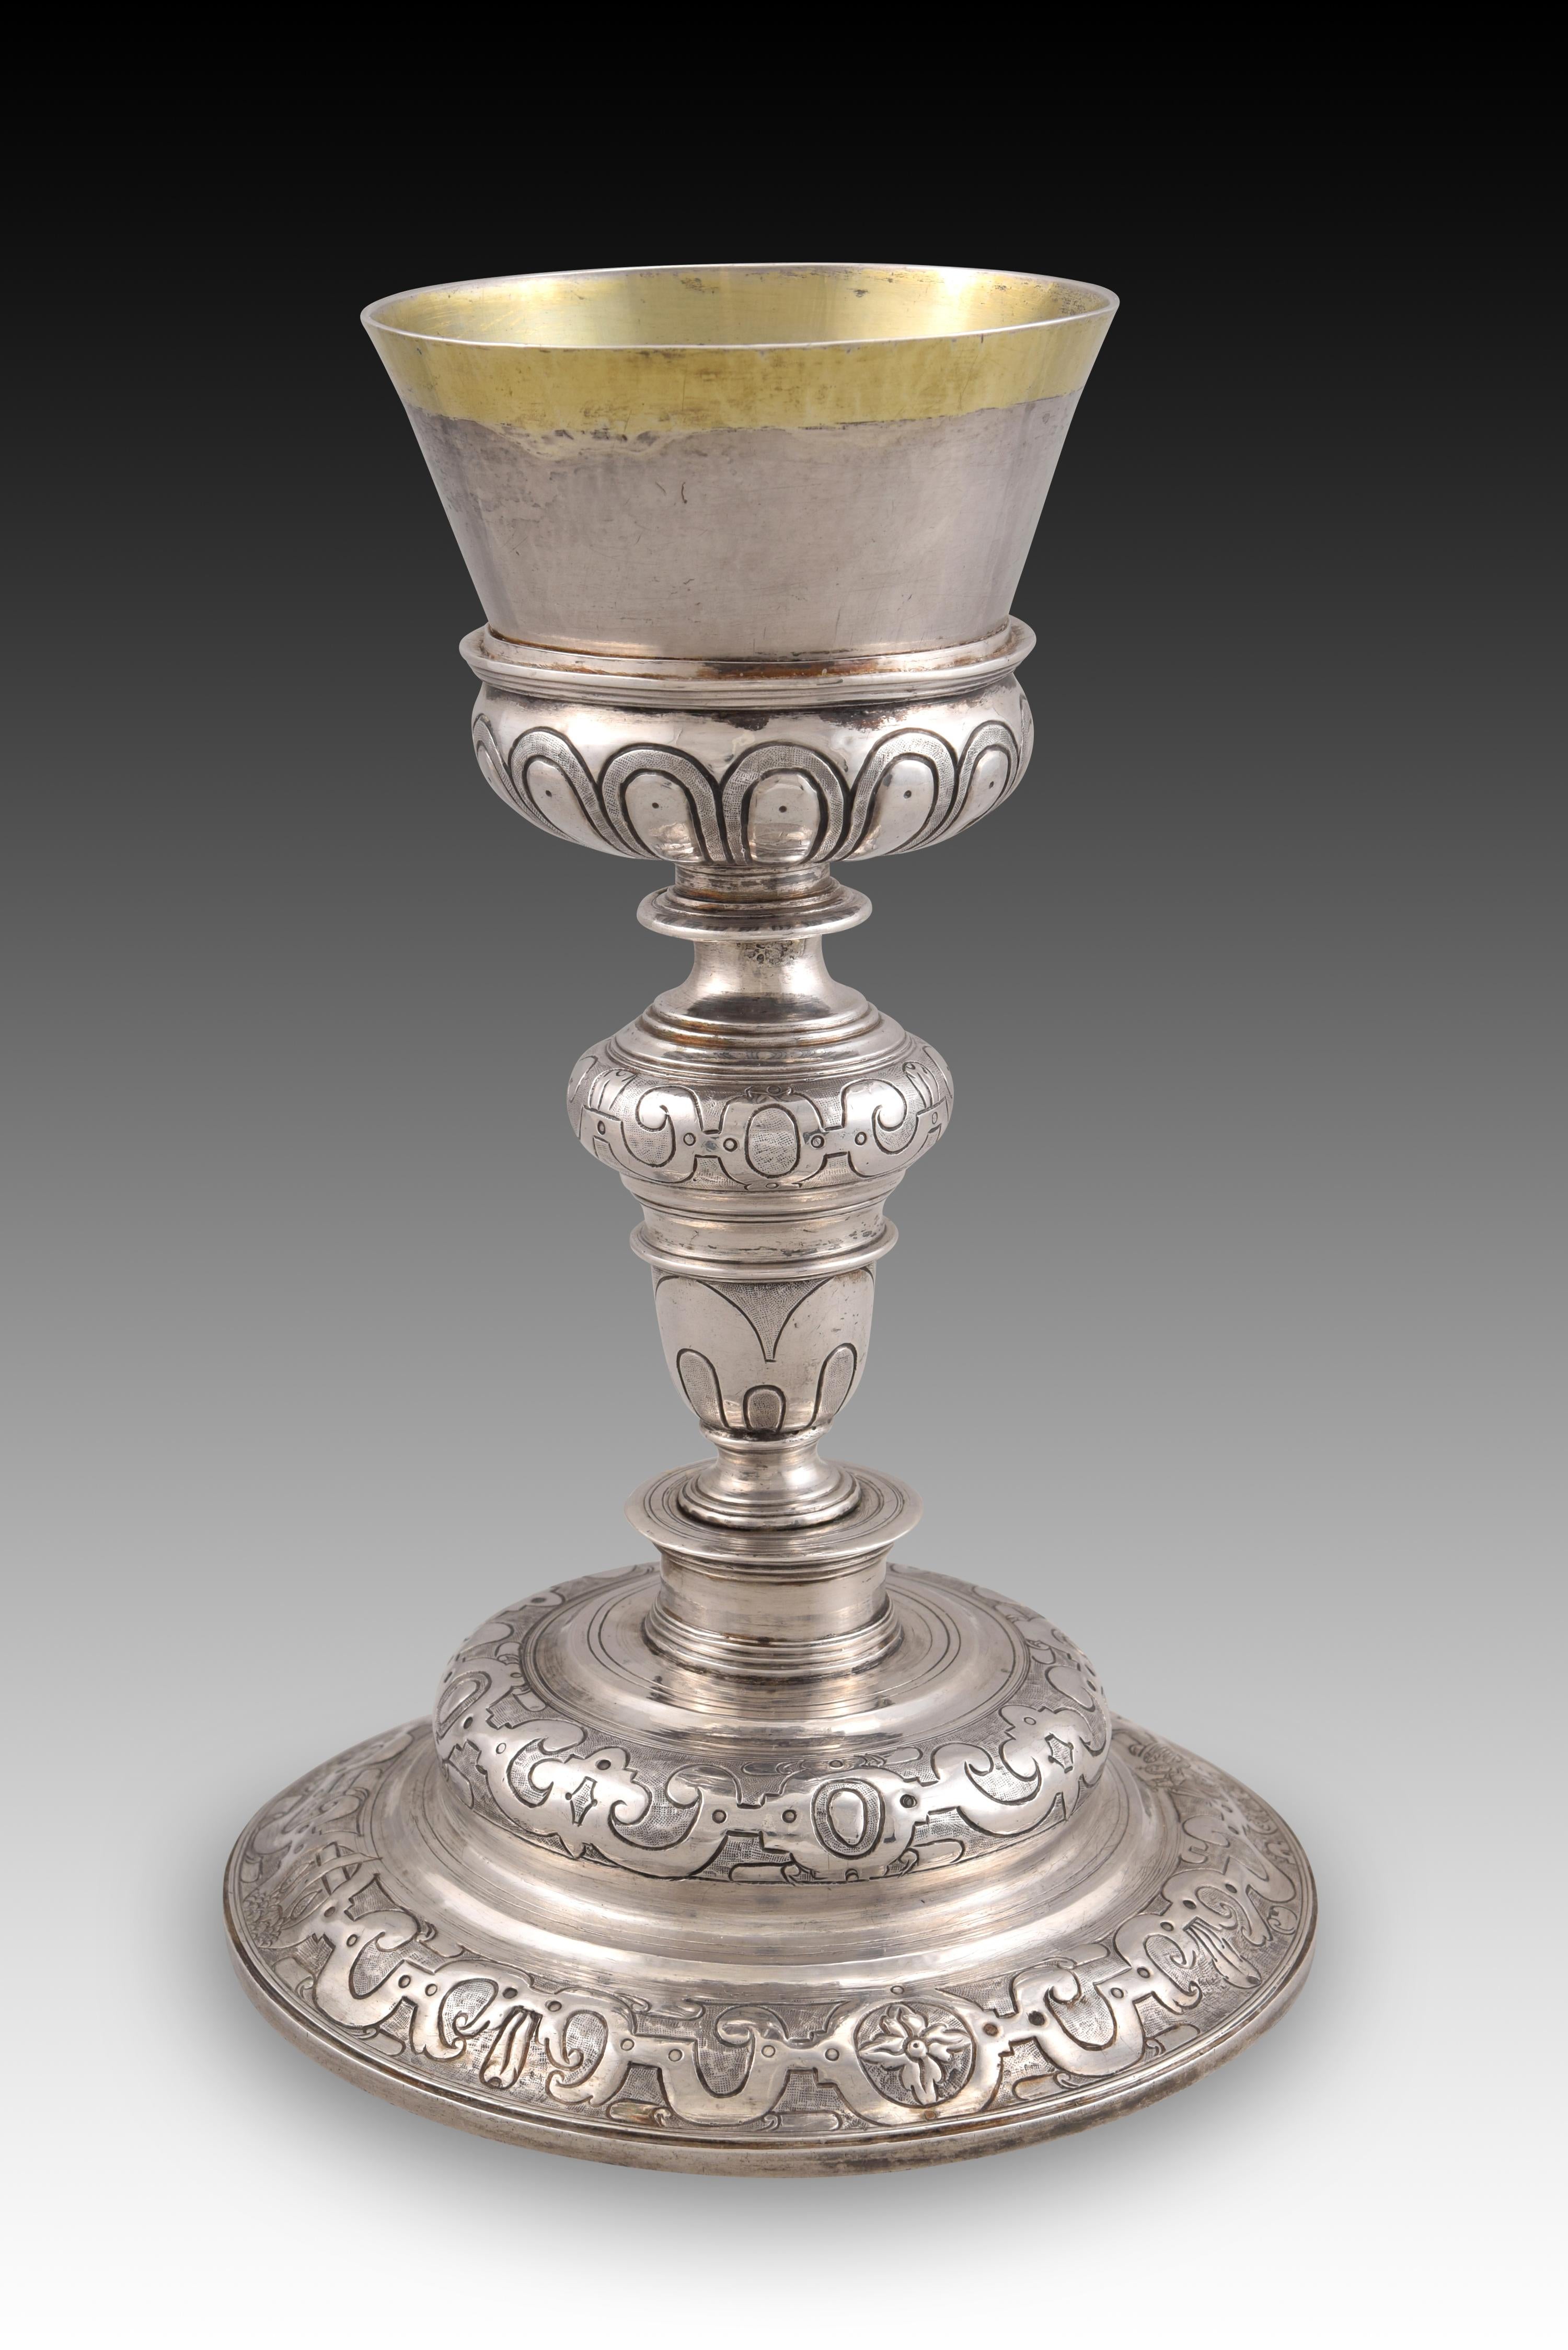 Baroque Chalice with Weight of Souls, Silver in Its Color and Gilt, Spain, 17th Century